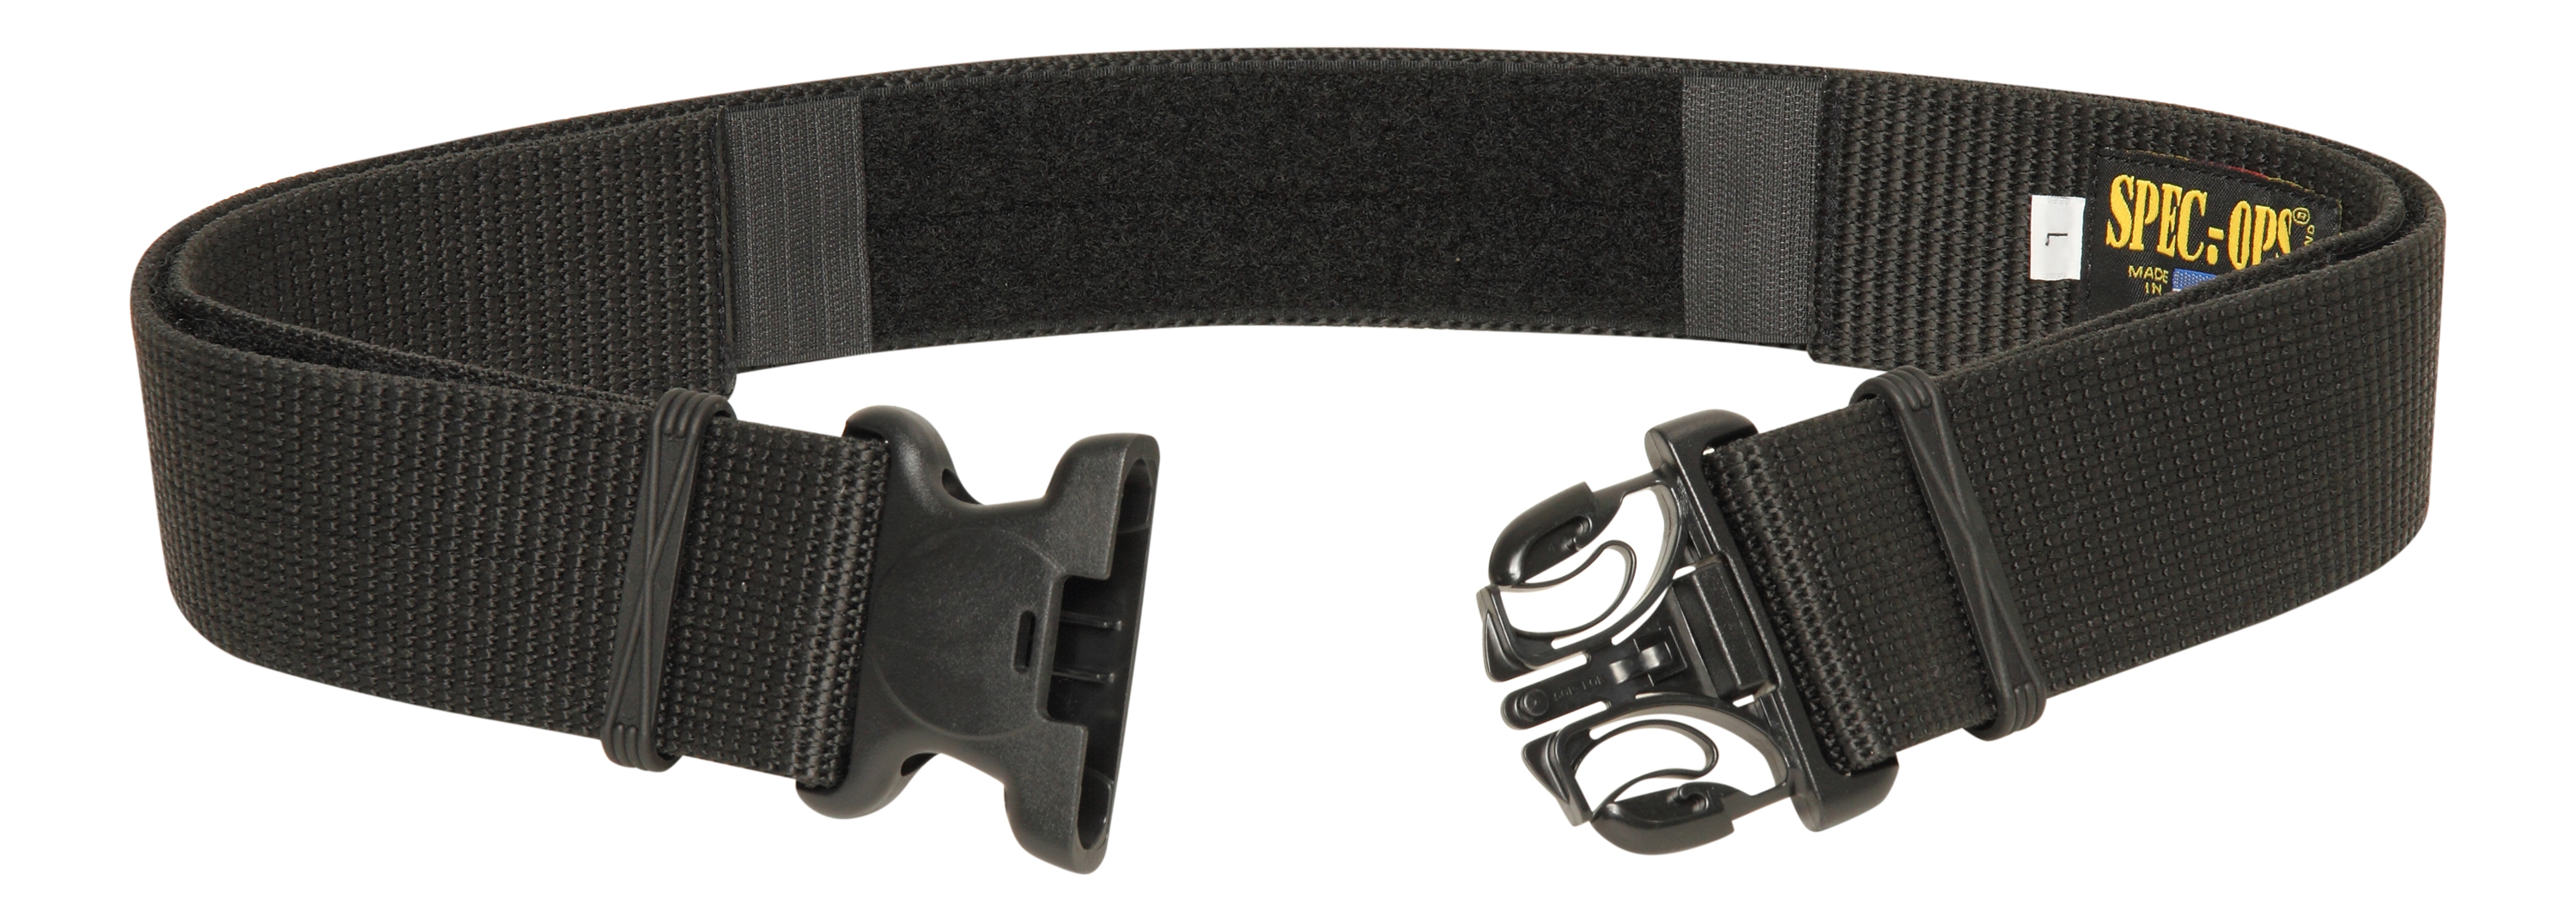 Buy Ultra Duty Belt And More